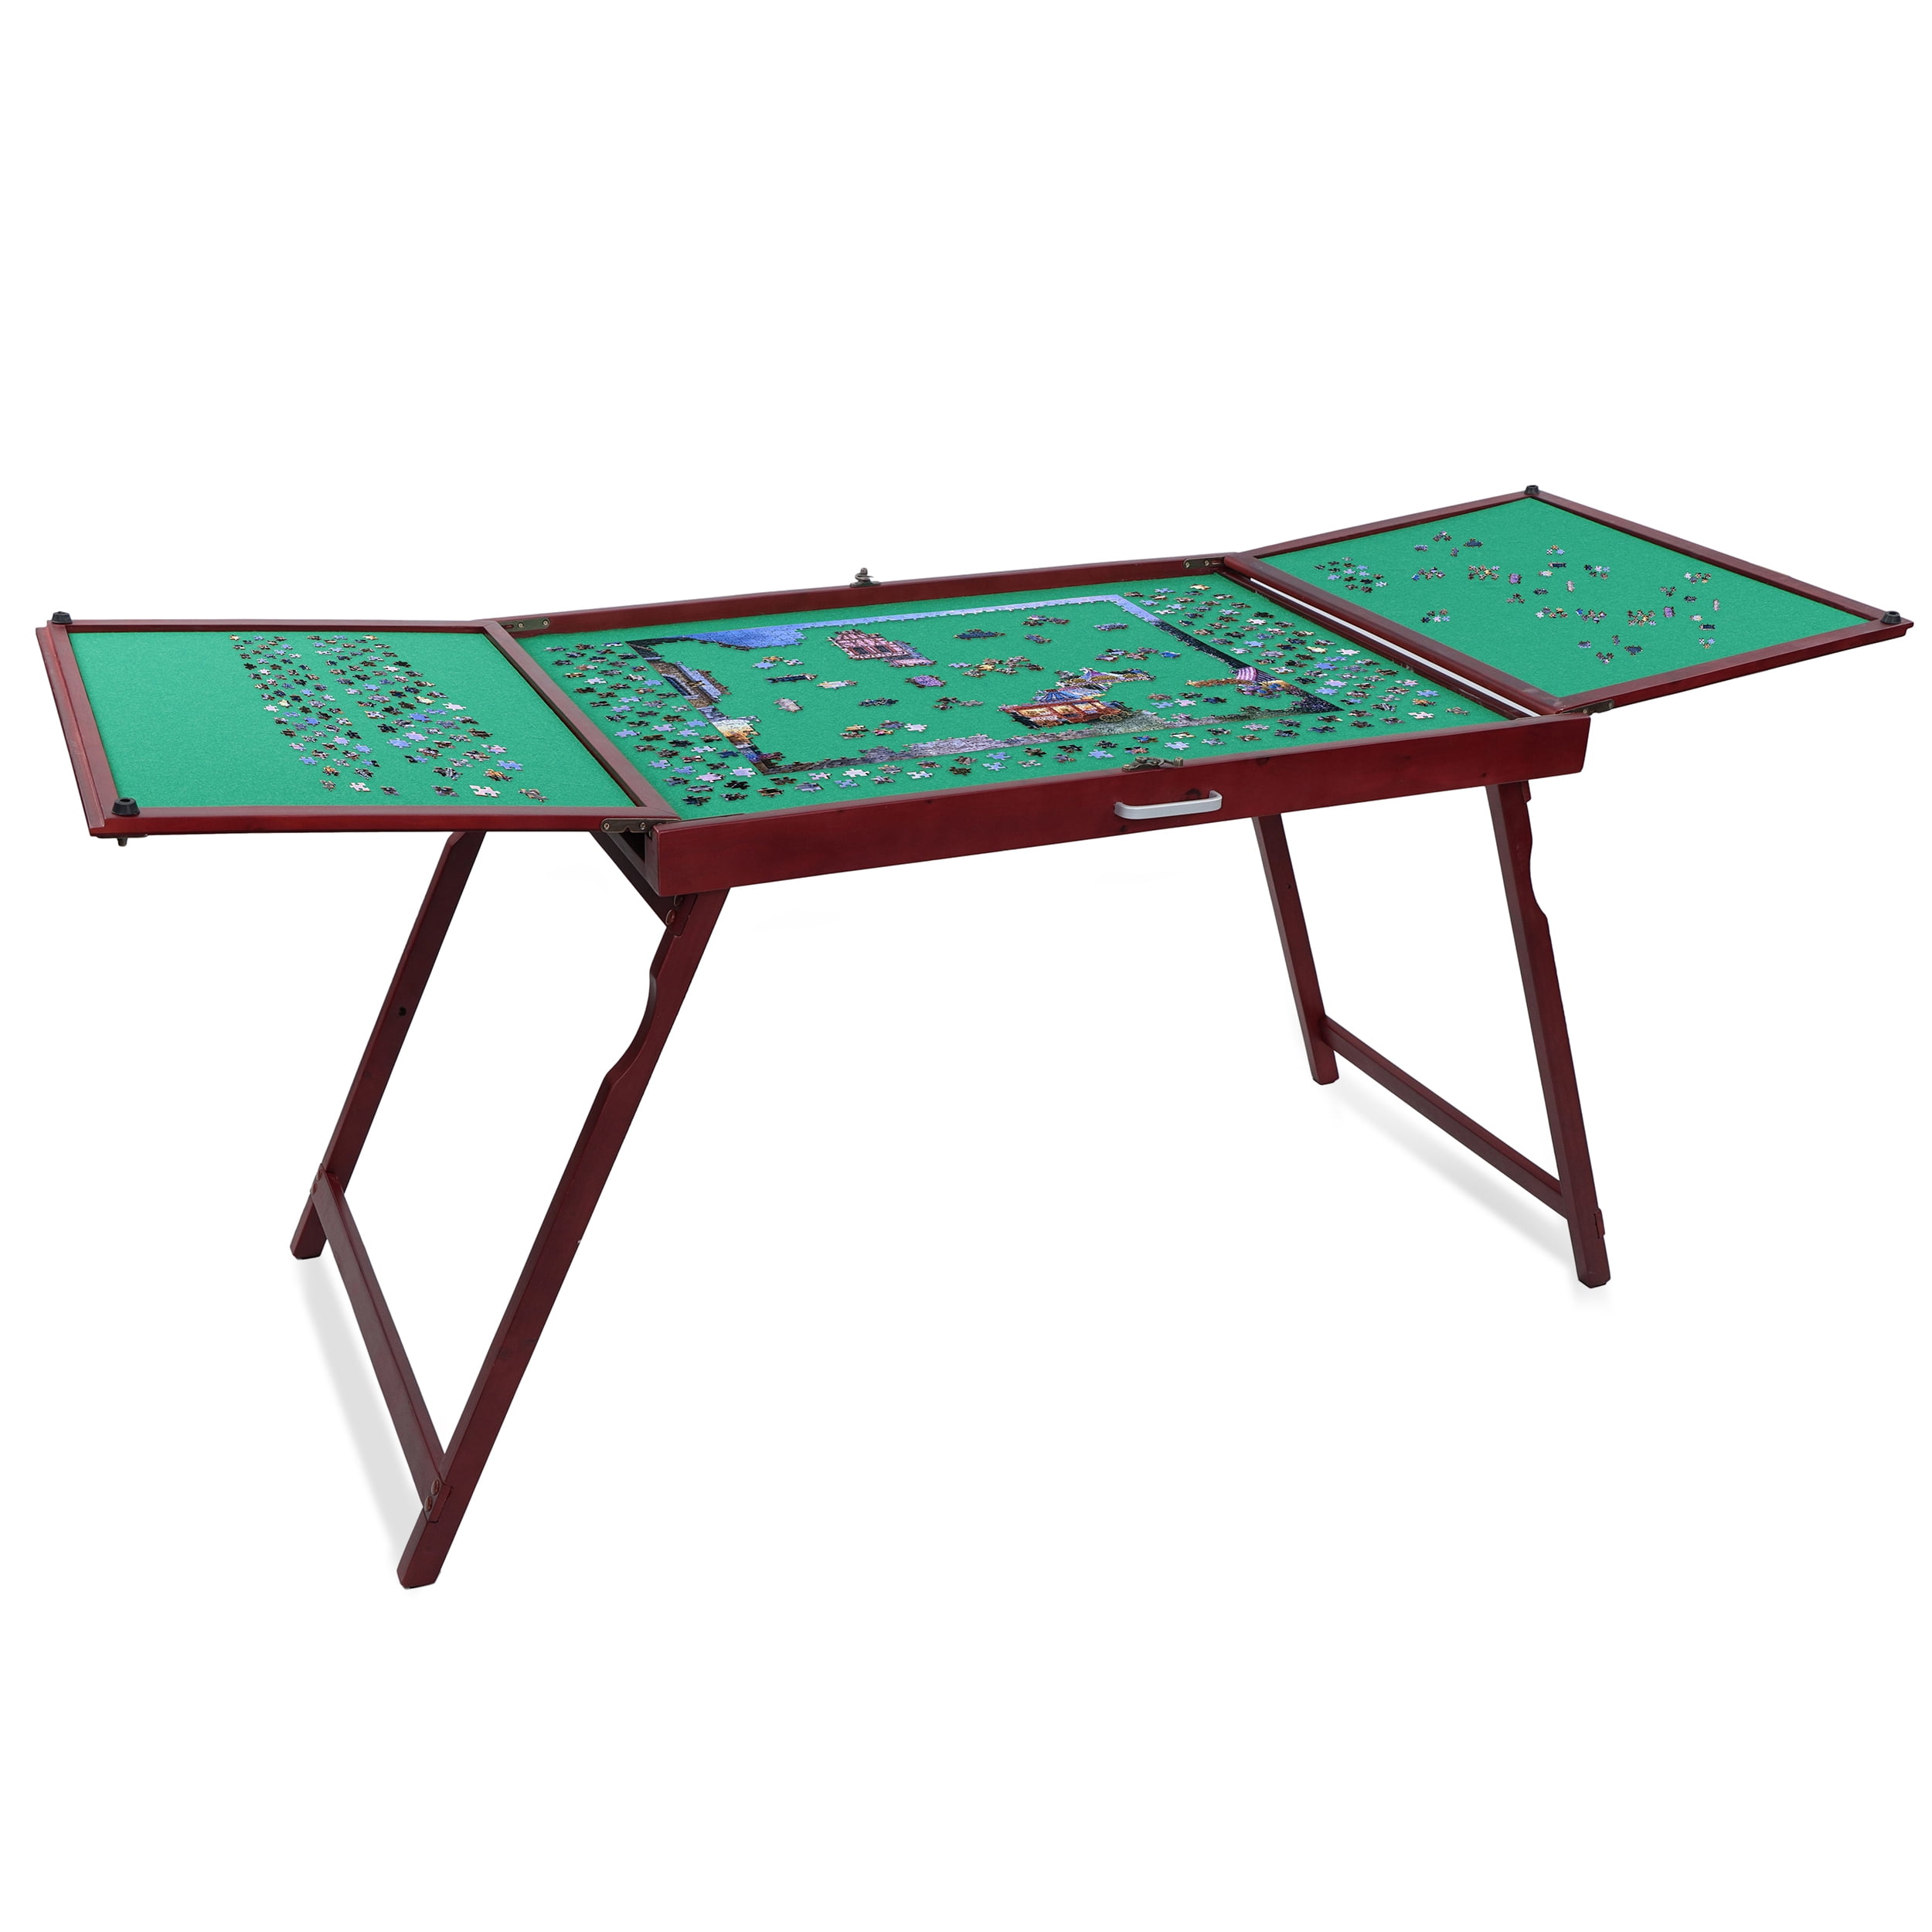 Jigitz Jigsaw Puzzle Tables with Legs - 37x26in Puzzle Board and Foldout  Trays